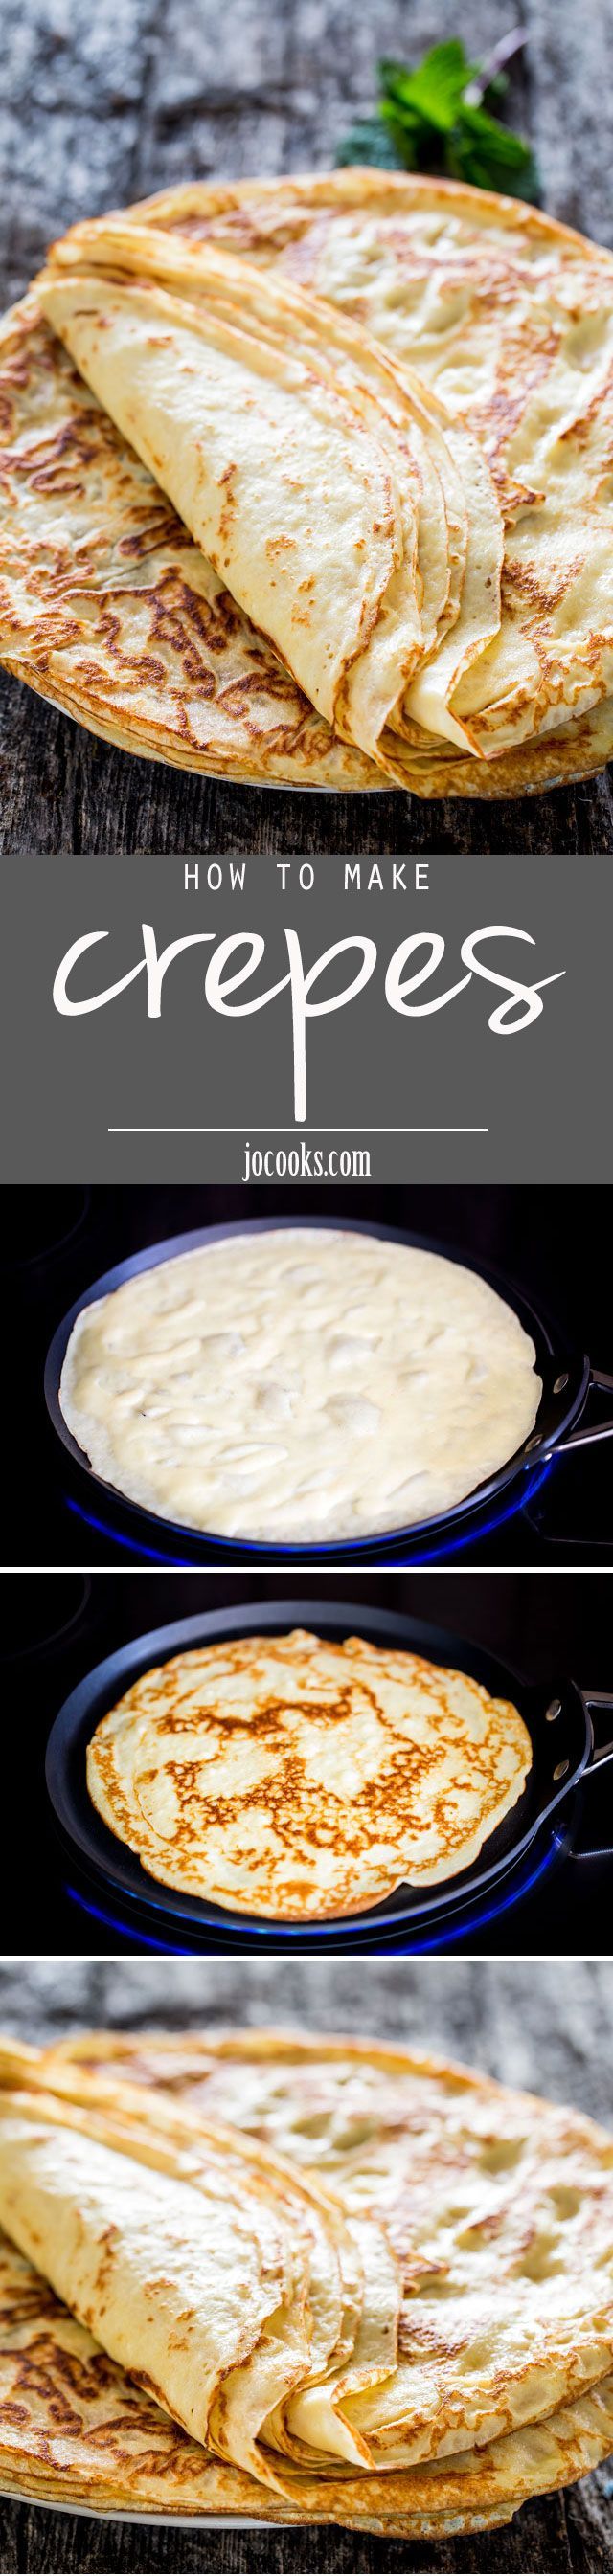 Homemade crepes – Learn how to make crepes from scratch! Serve these with your fav